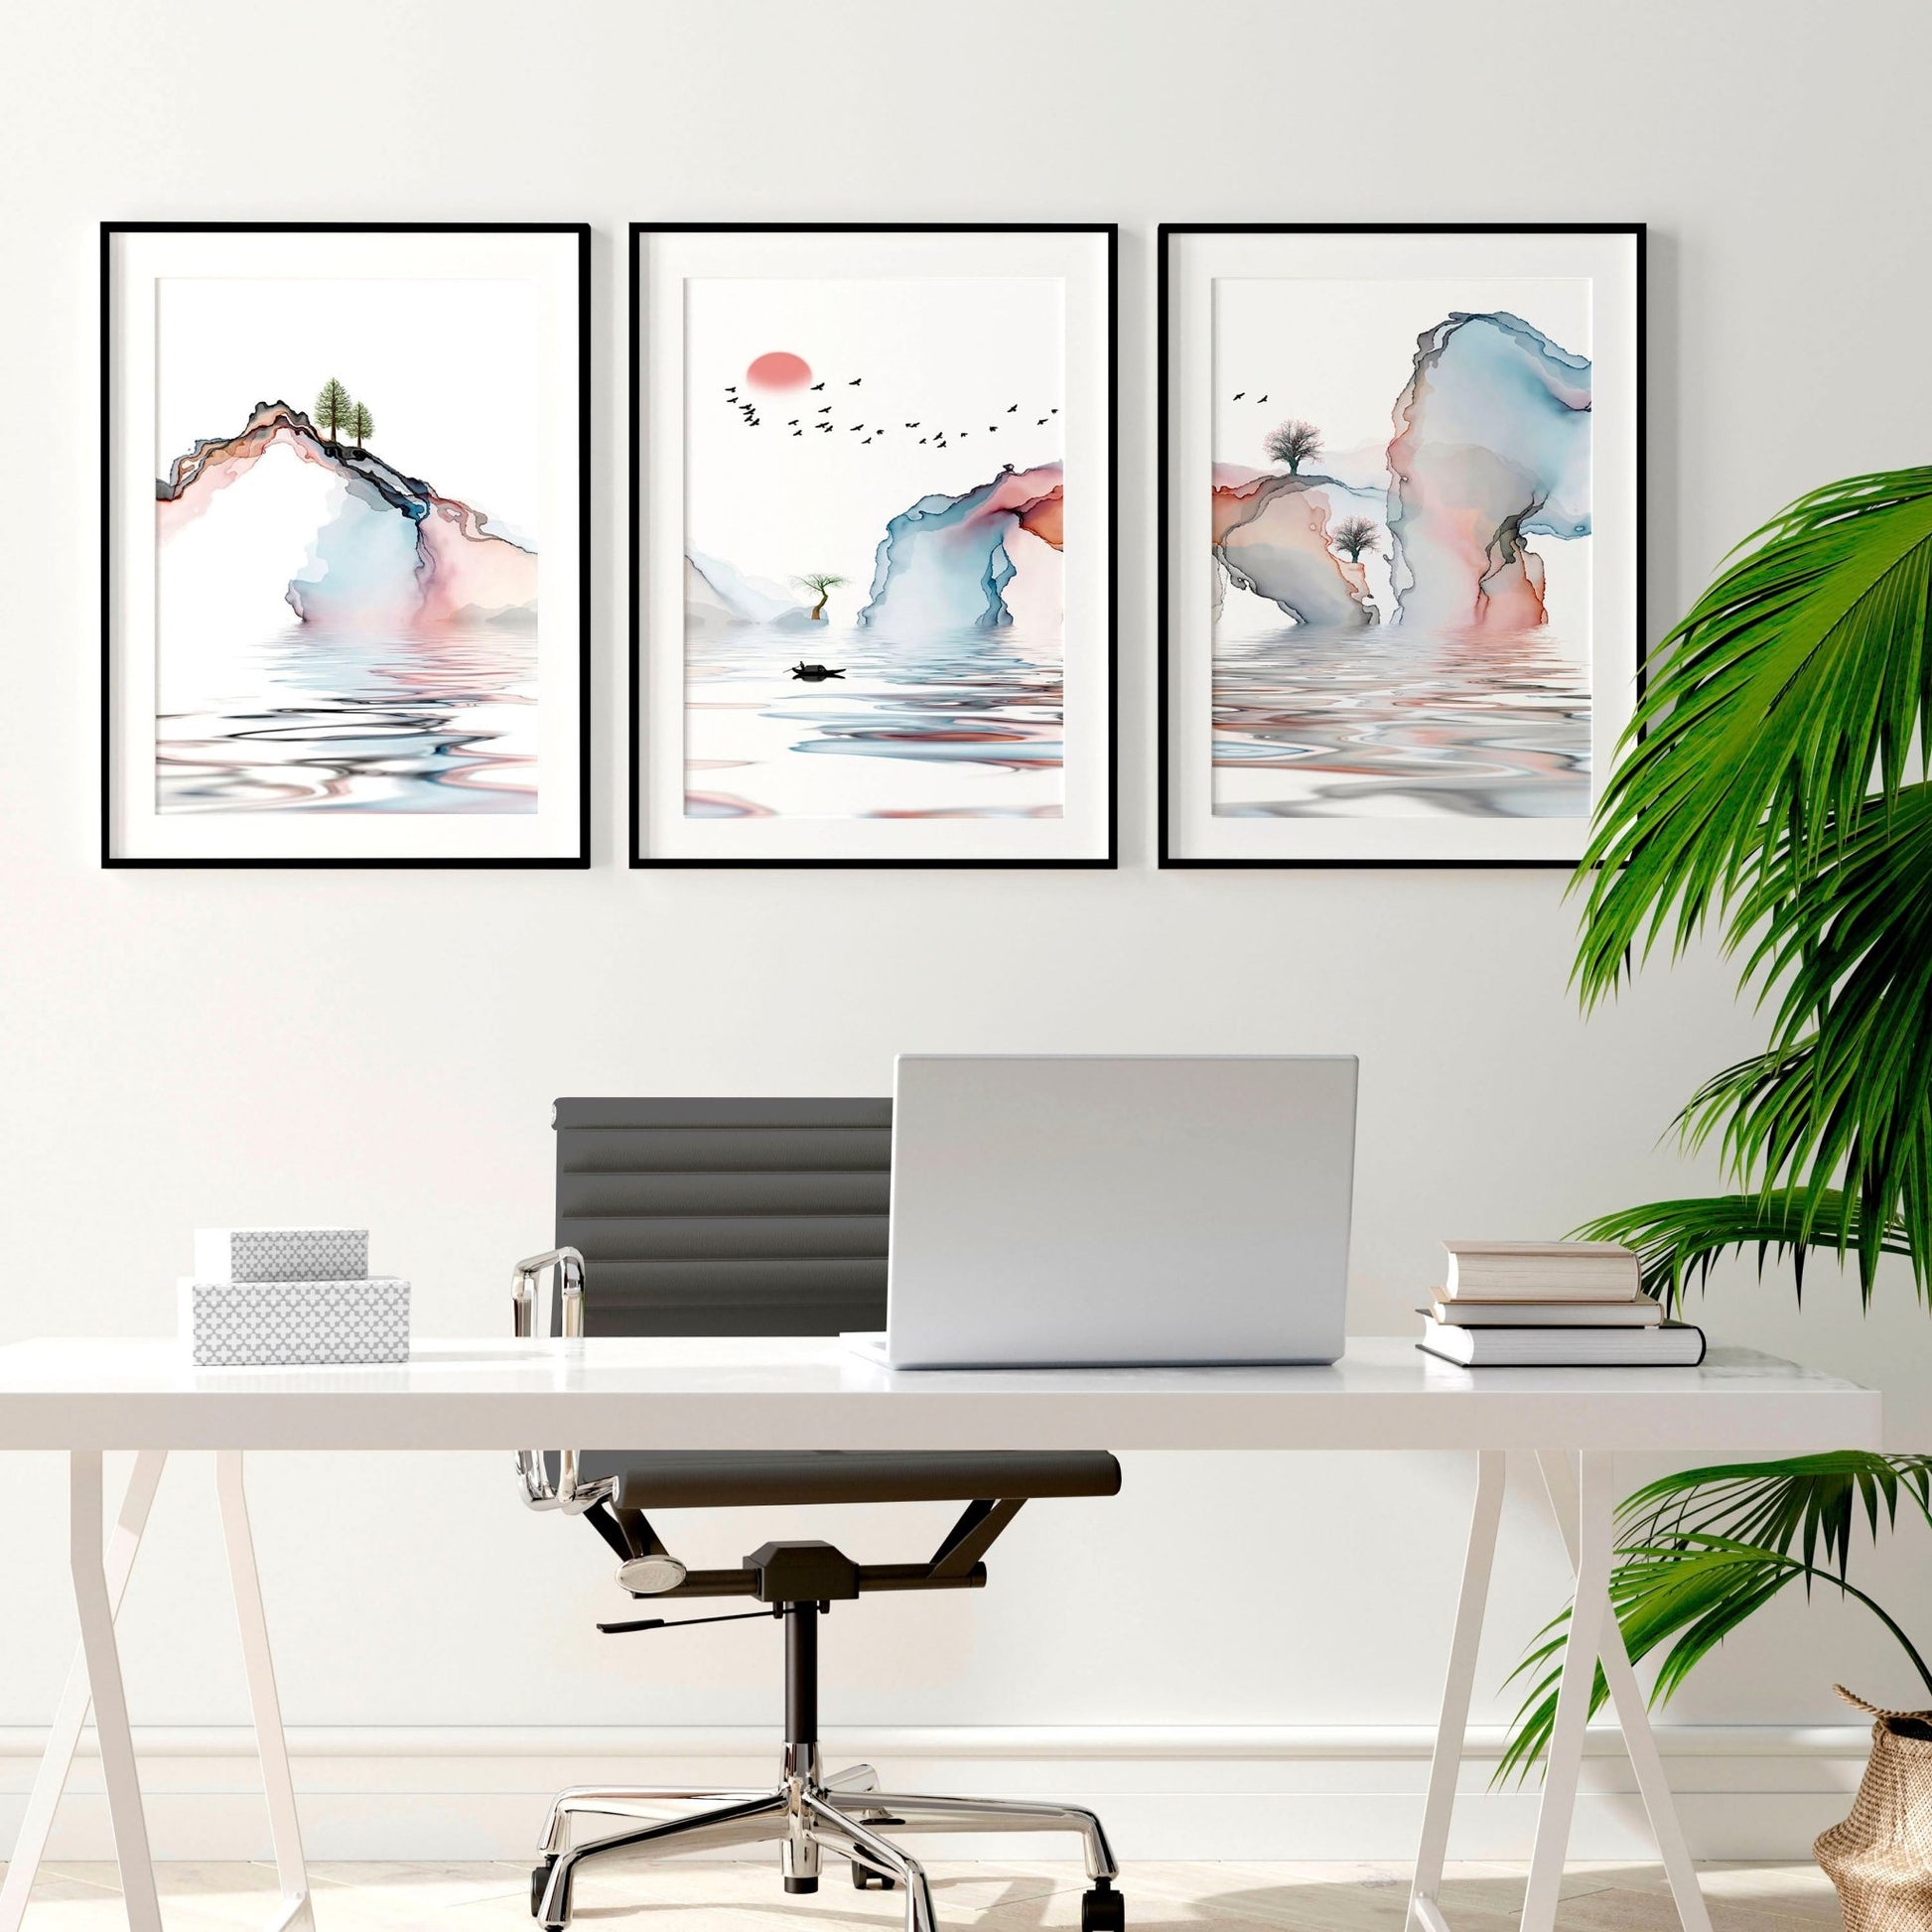 Prints for Office walls | set of 3 wall art prints - About Wall Art